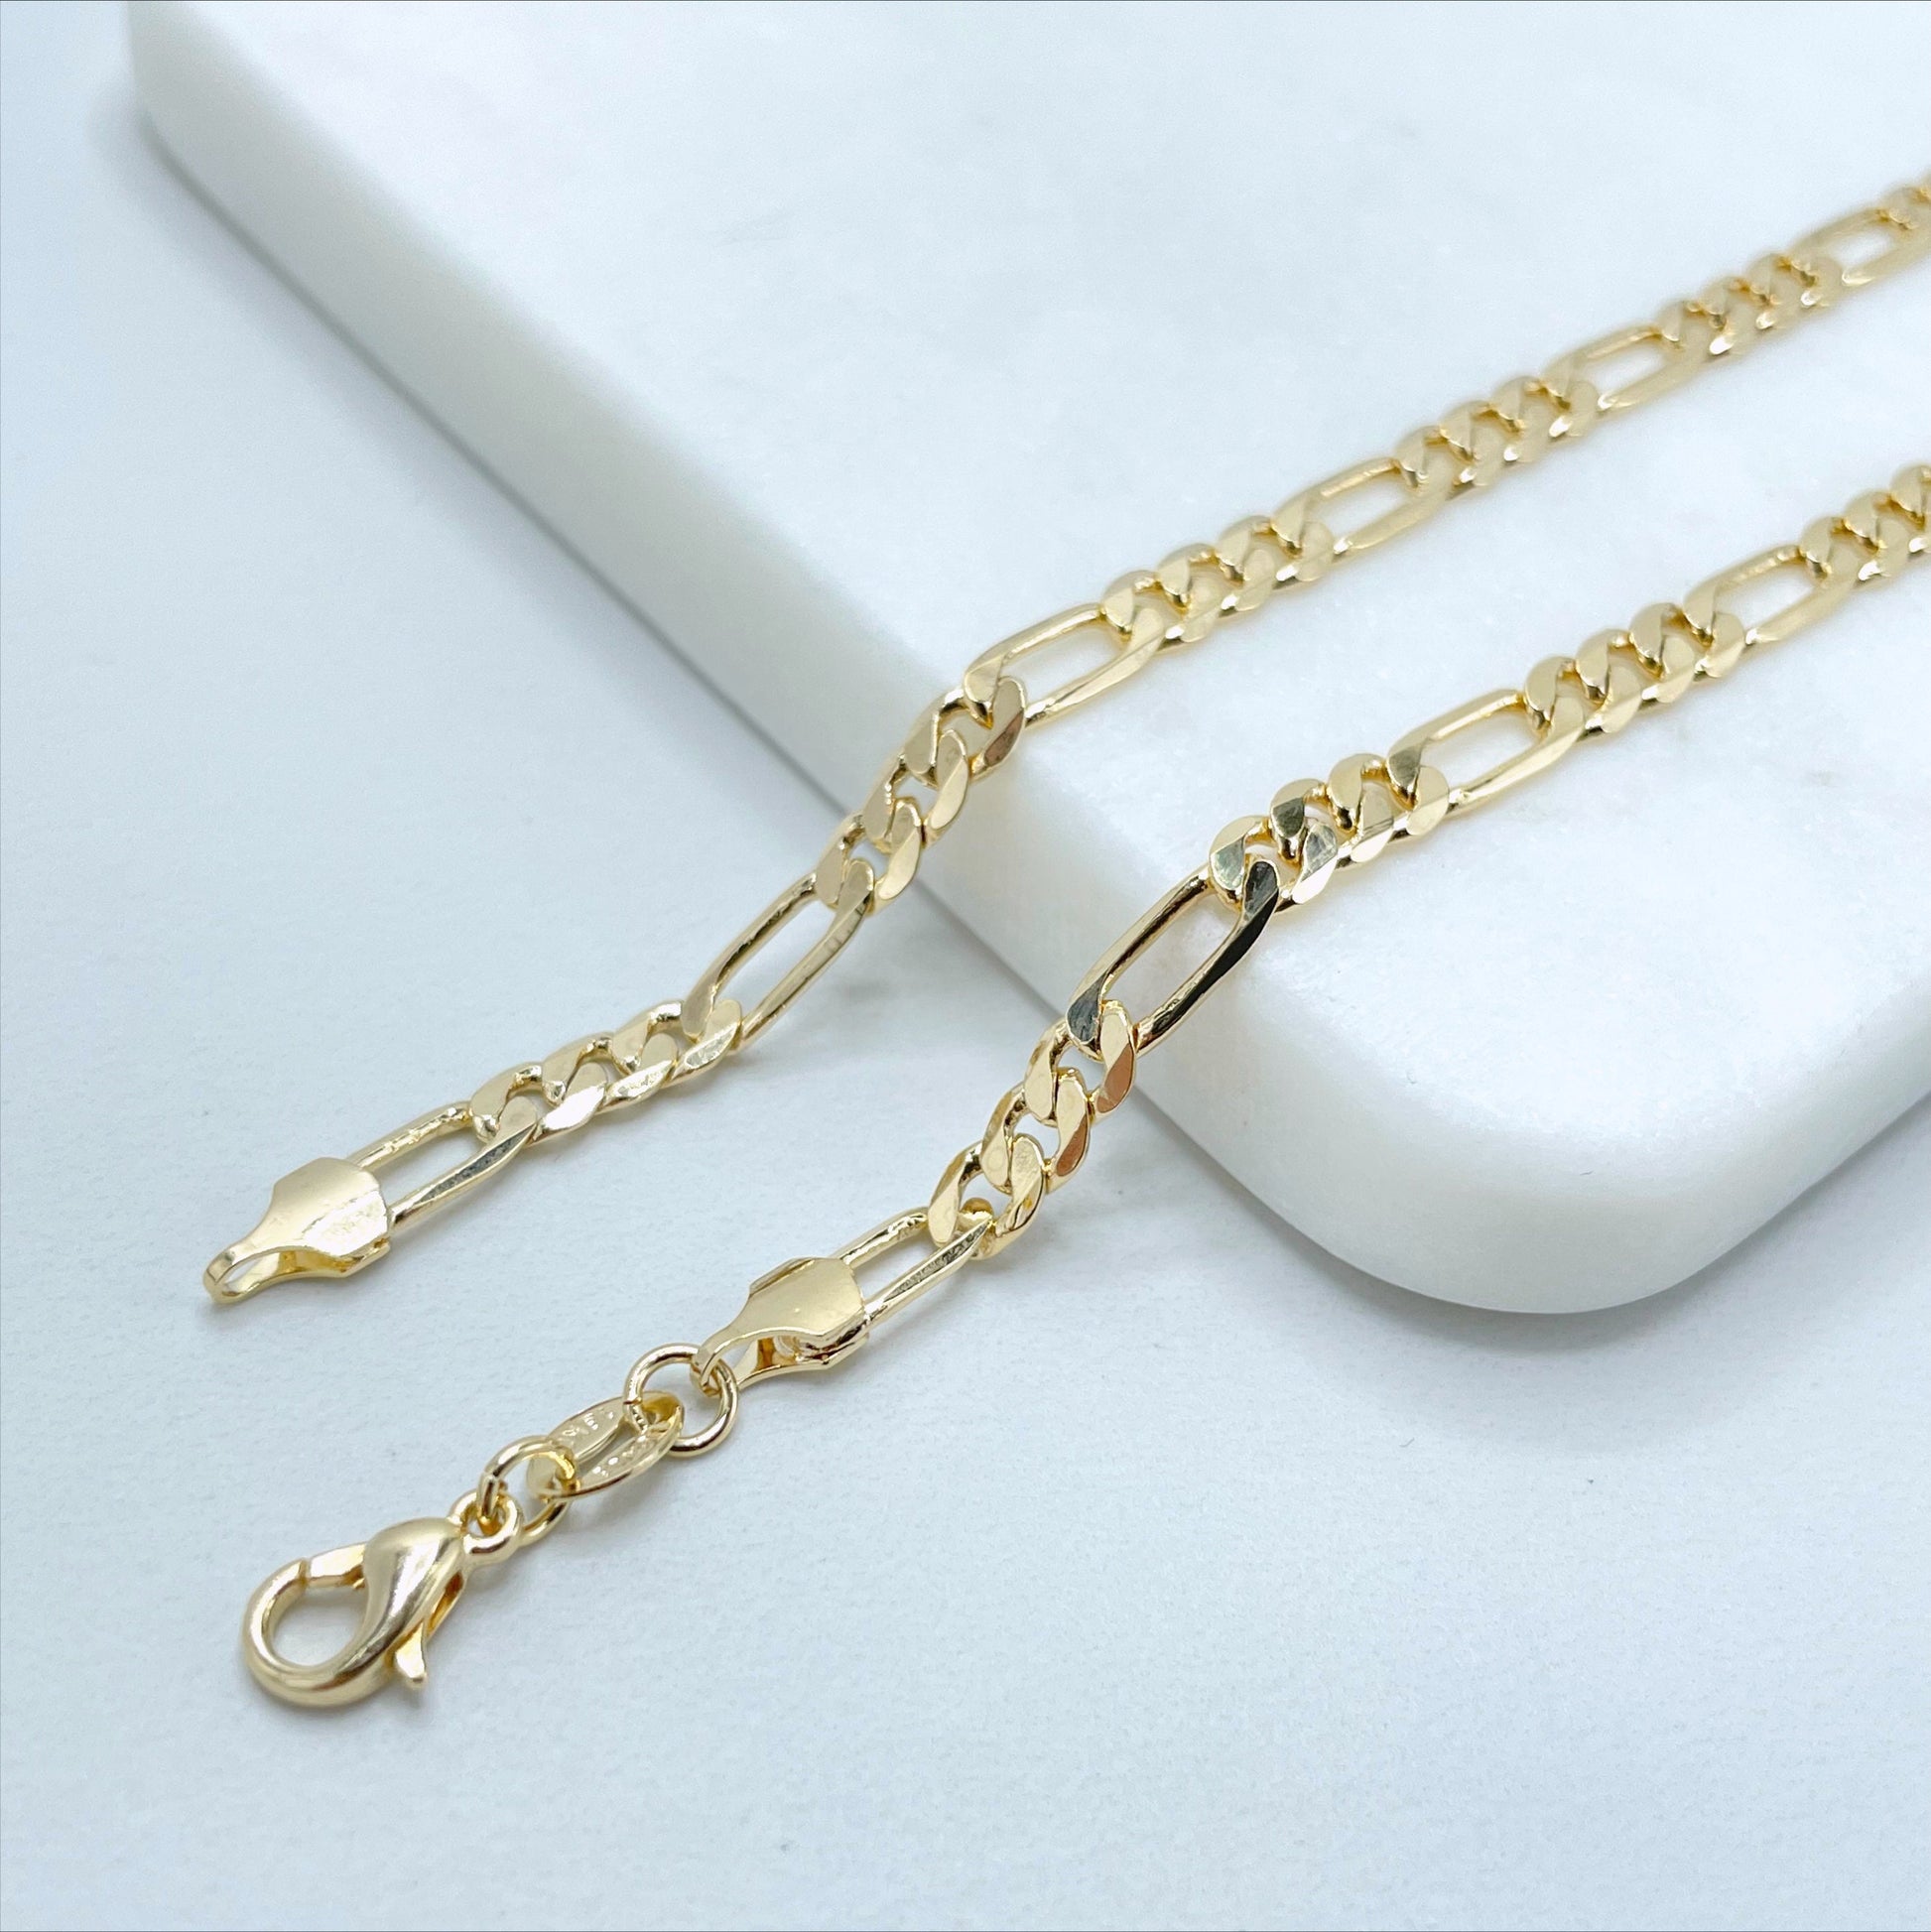 18k Gold Filled 4mm Figaro Link, 18'', 20'', 22'', 24 inches of length, Chains Wholesale and Jewelry Supplies